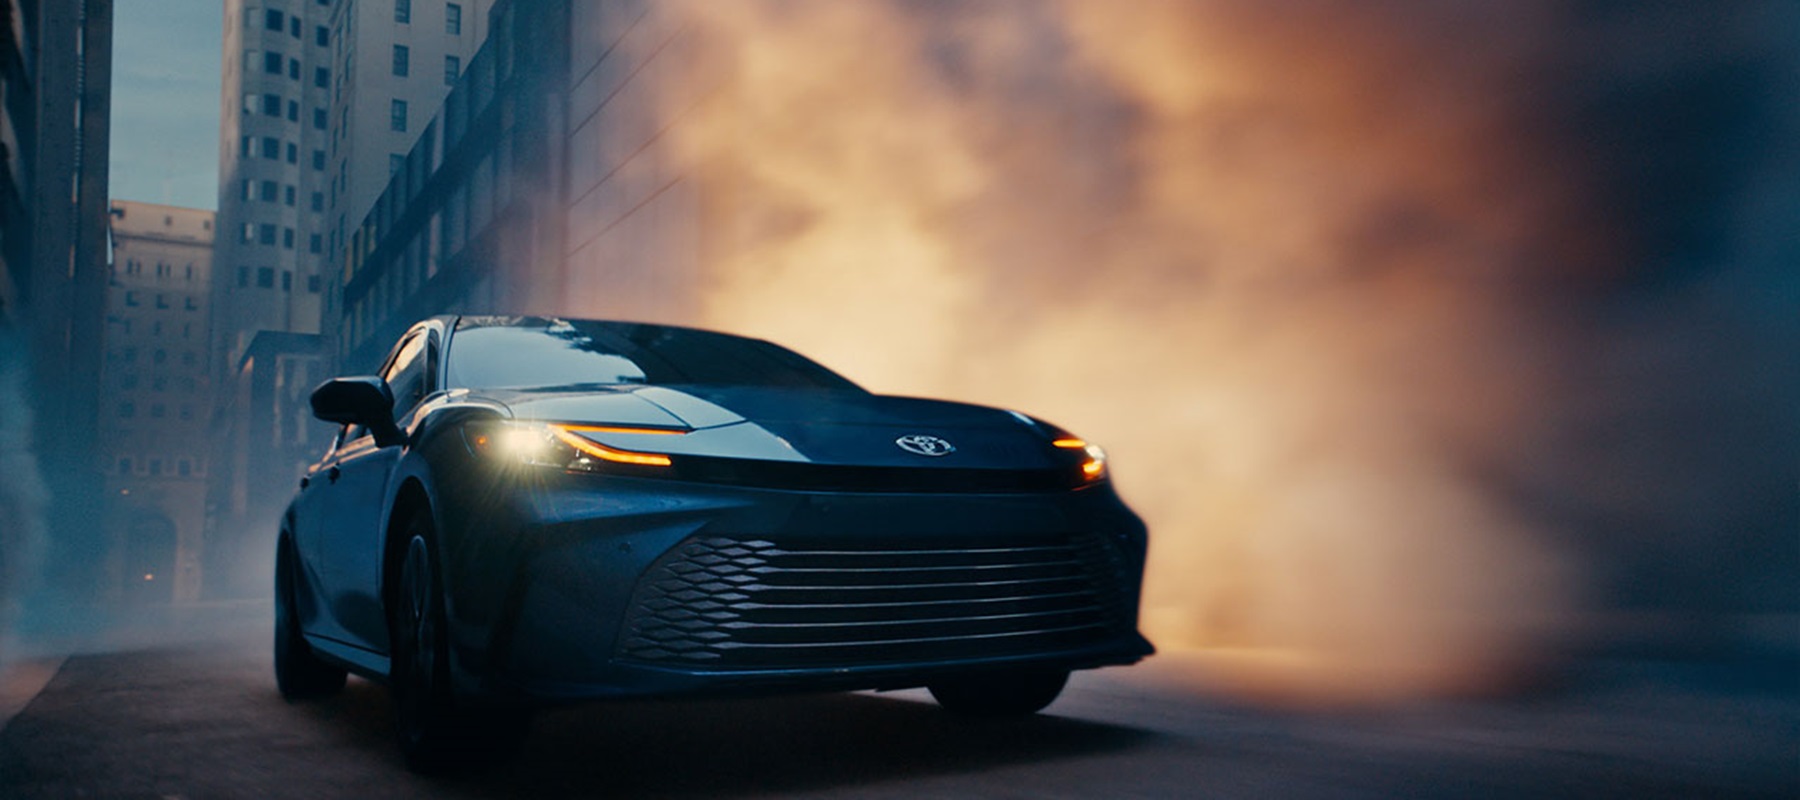 Toyota unveils marketing campaign for the hybrid next generation Camry